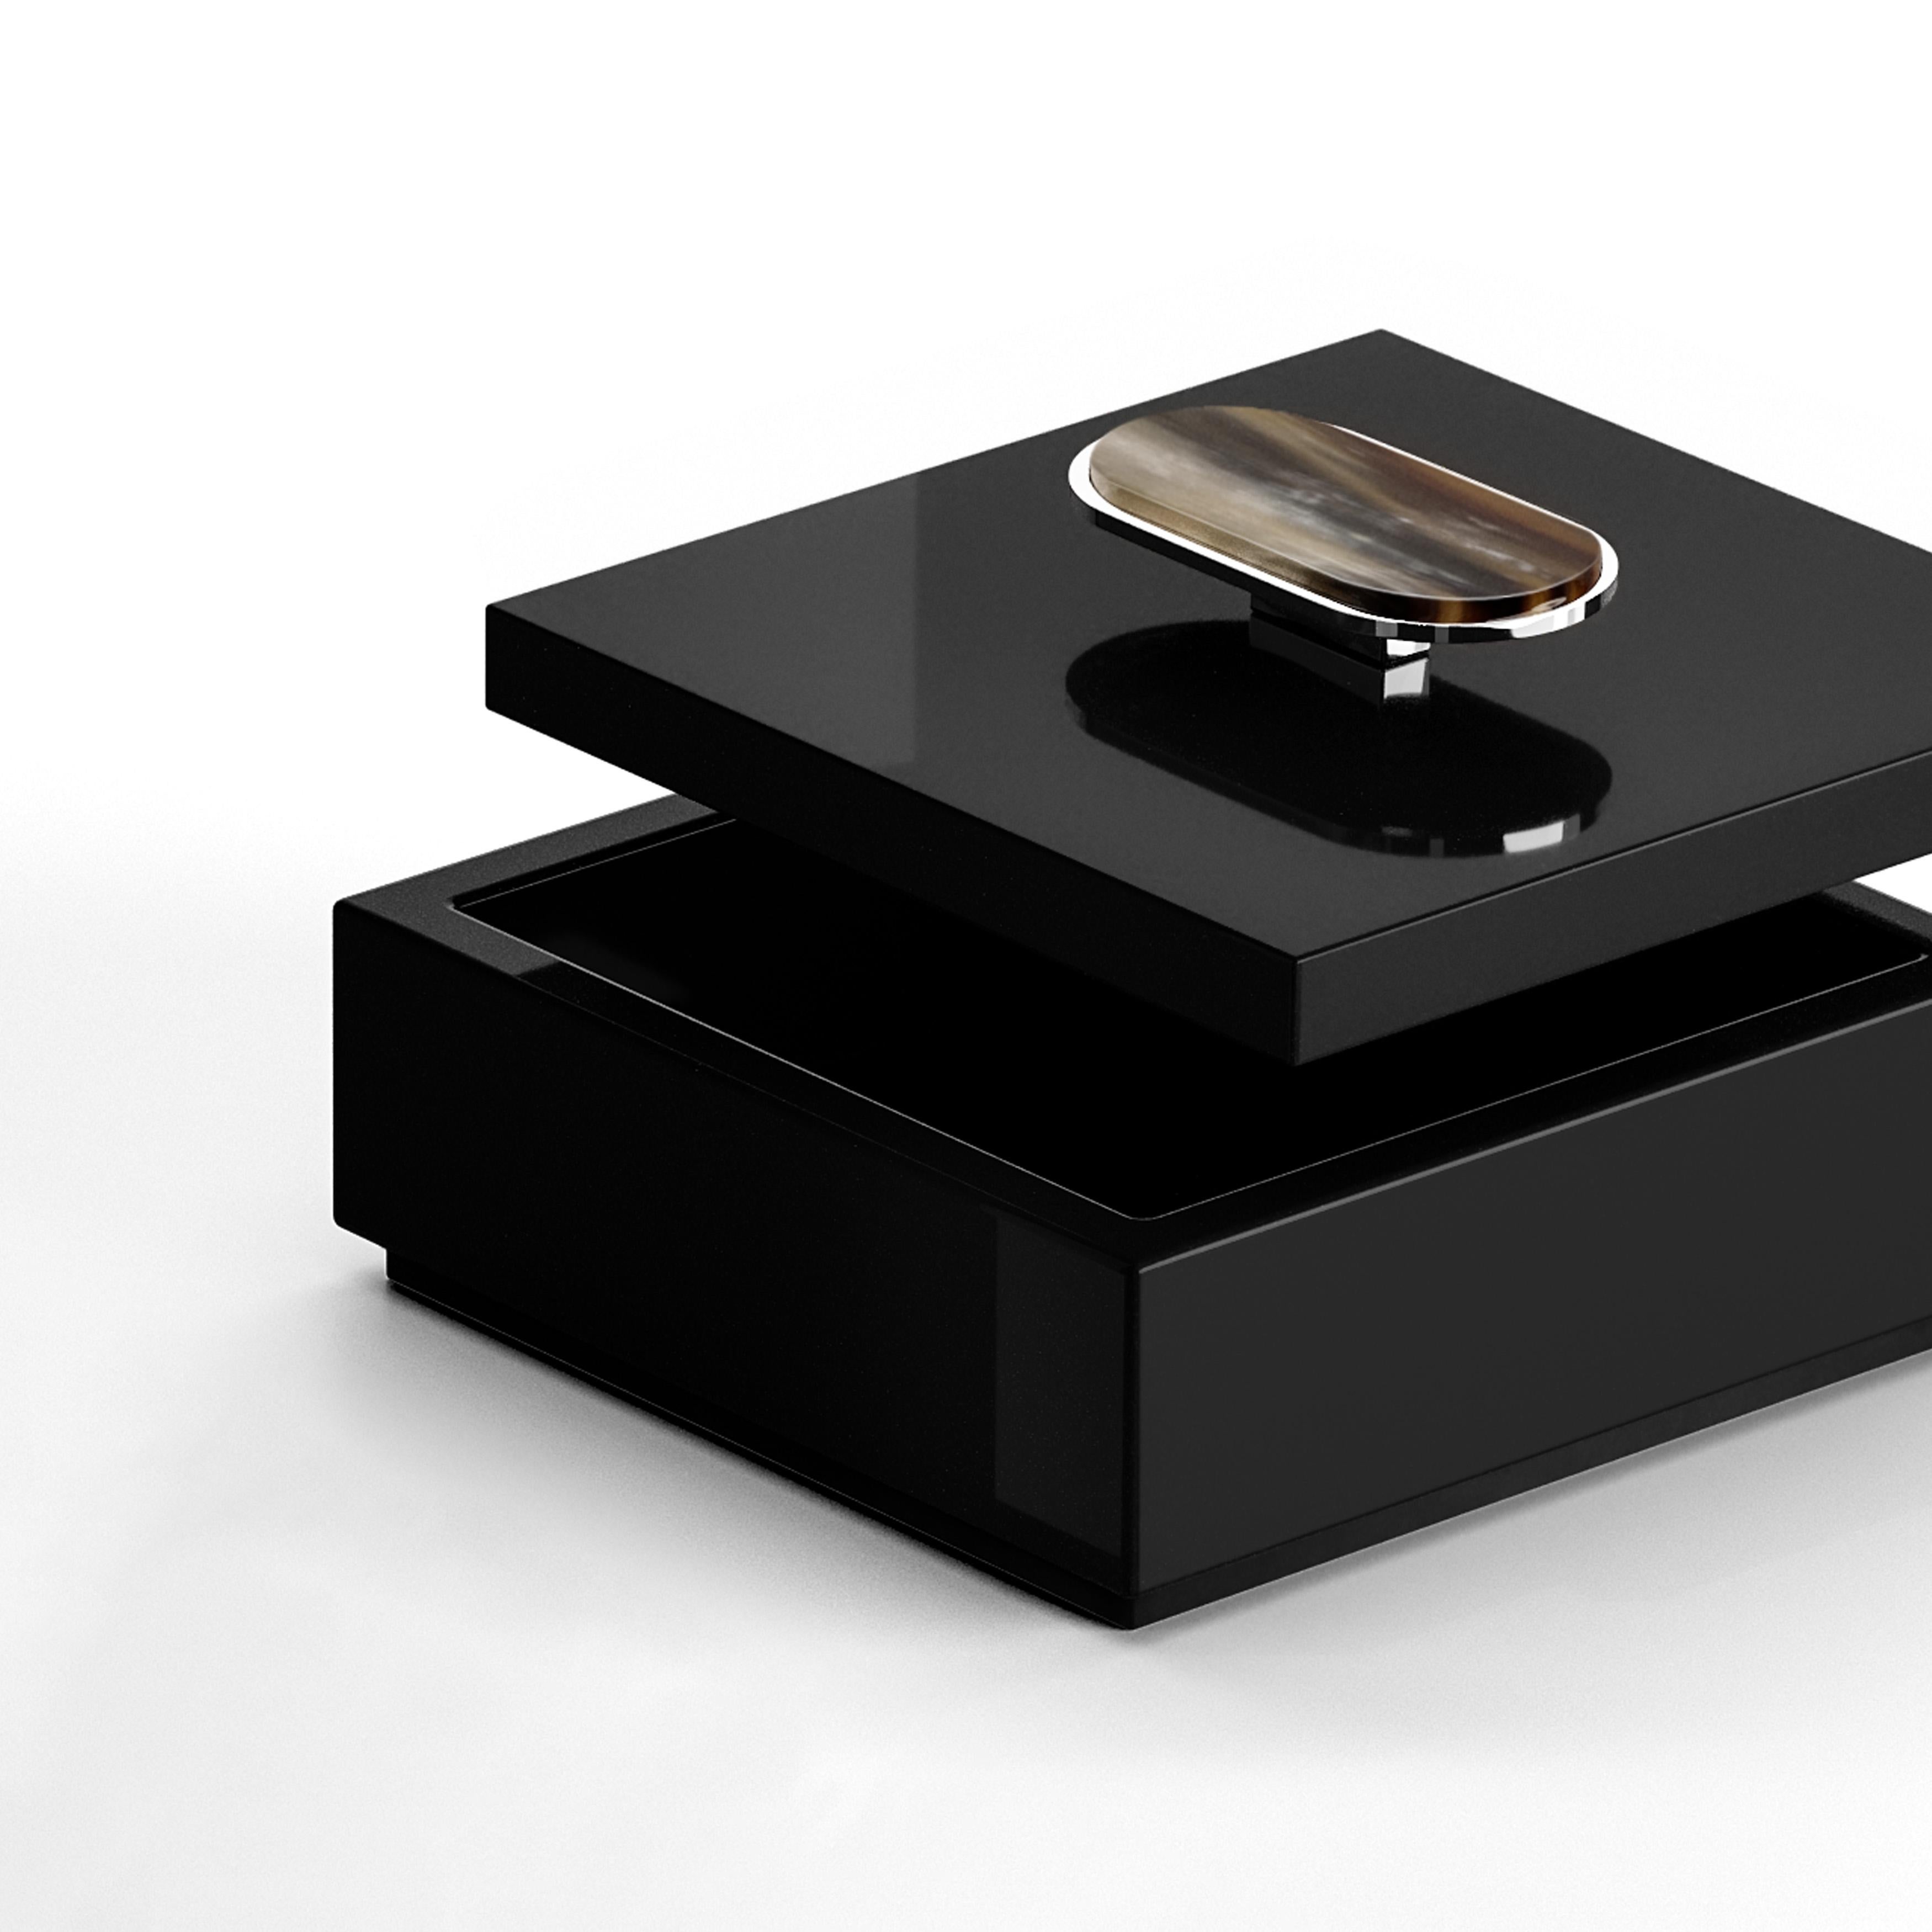 The Priora box exudes refined aesthetic and meticulous attention to detail, making it the ultimate accessory to store your personal belongings. Crafted from glossy black lacquered wood, the box features an elegant lid adorned with a delicate detail